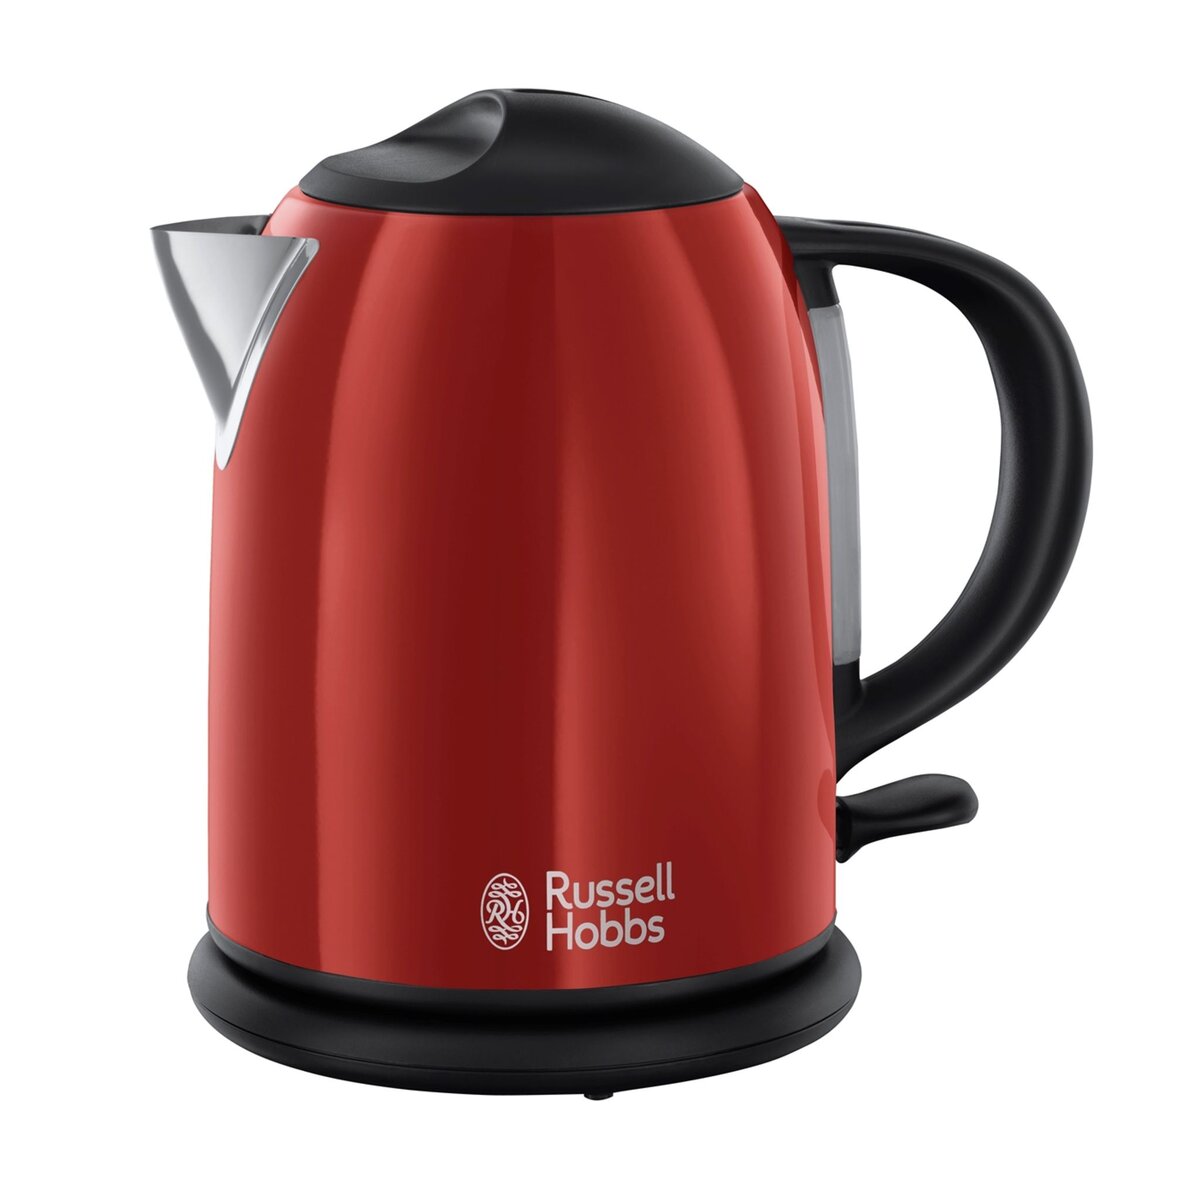 RUSSELL HOBBS Bouilloire 20191-70 Rouge